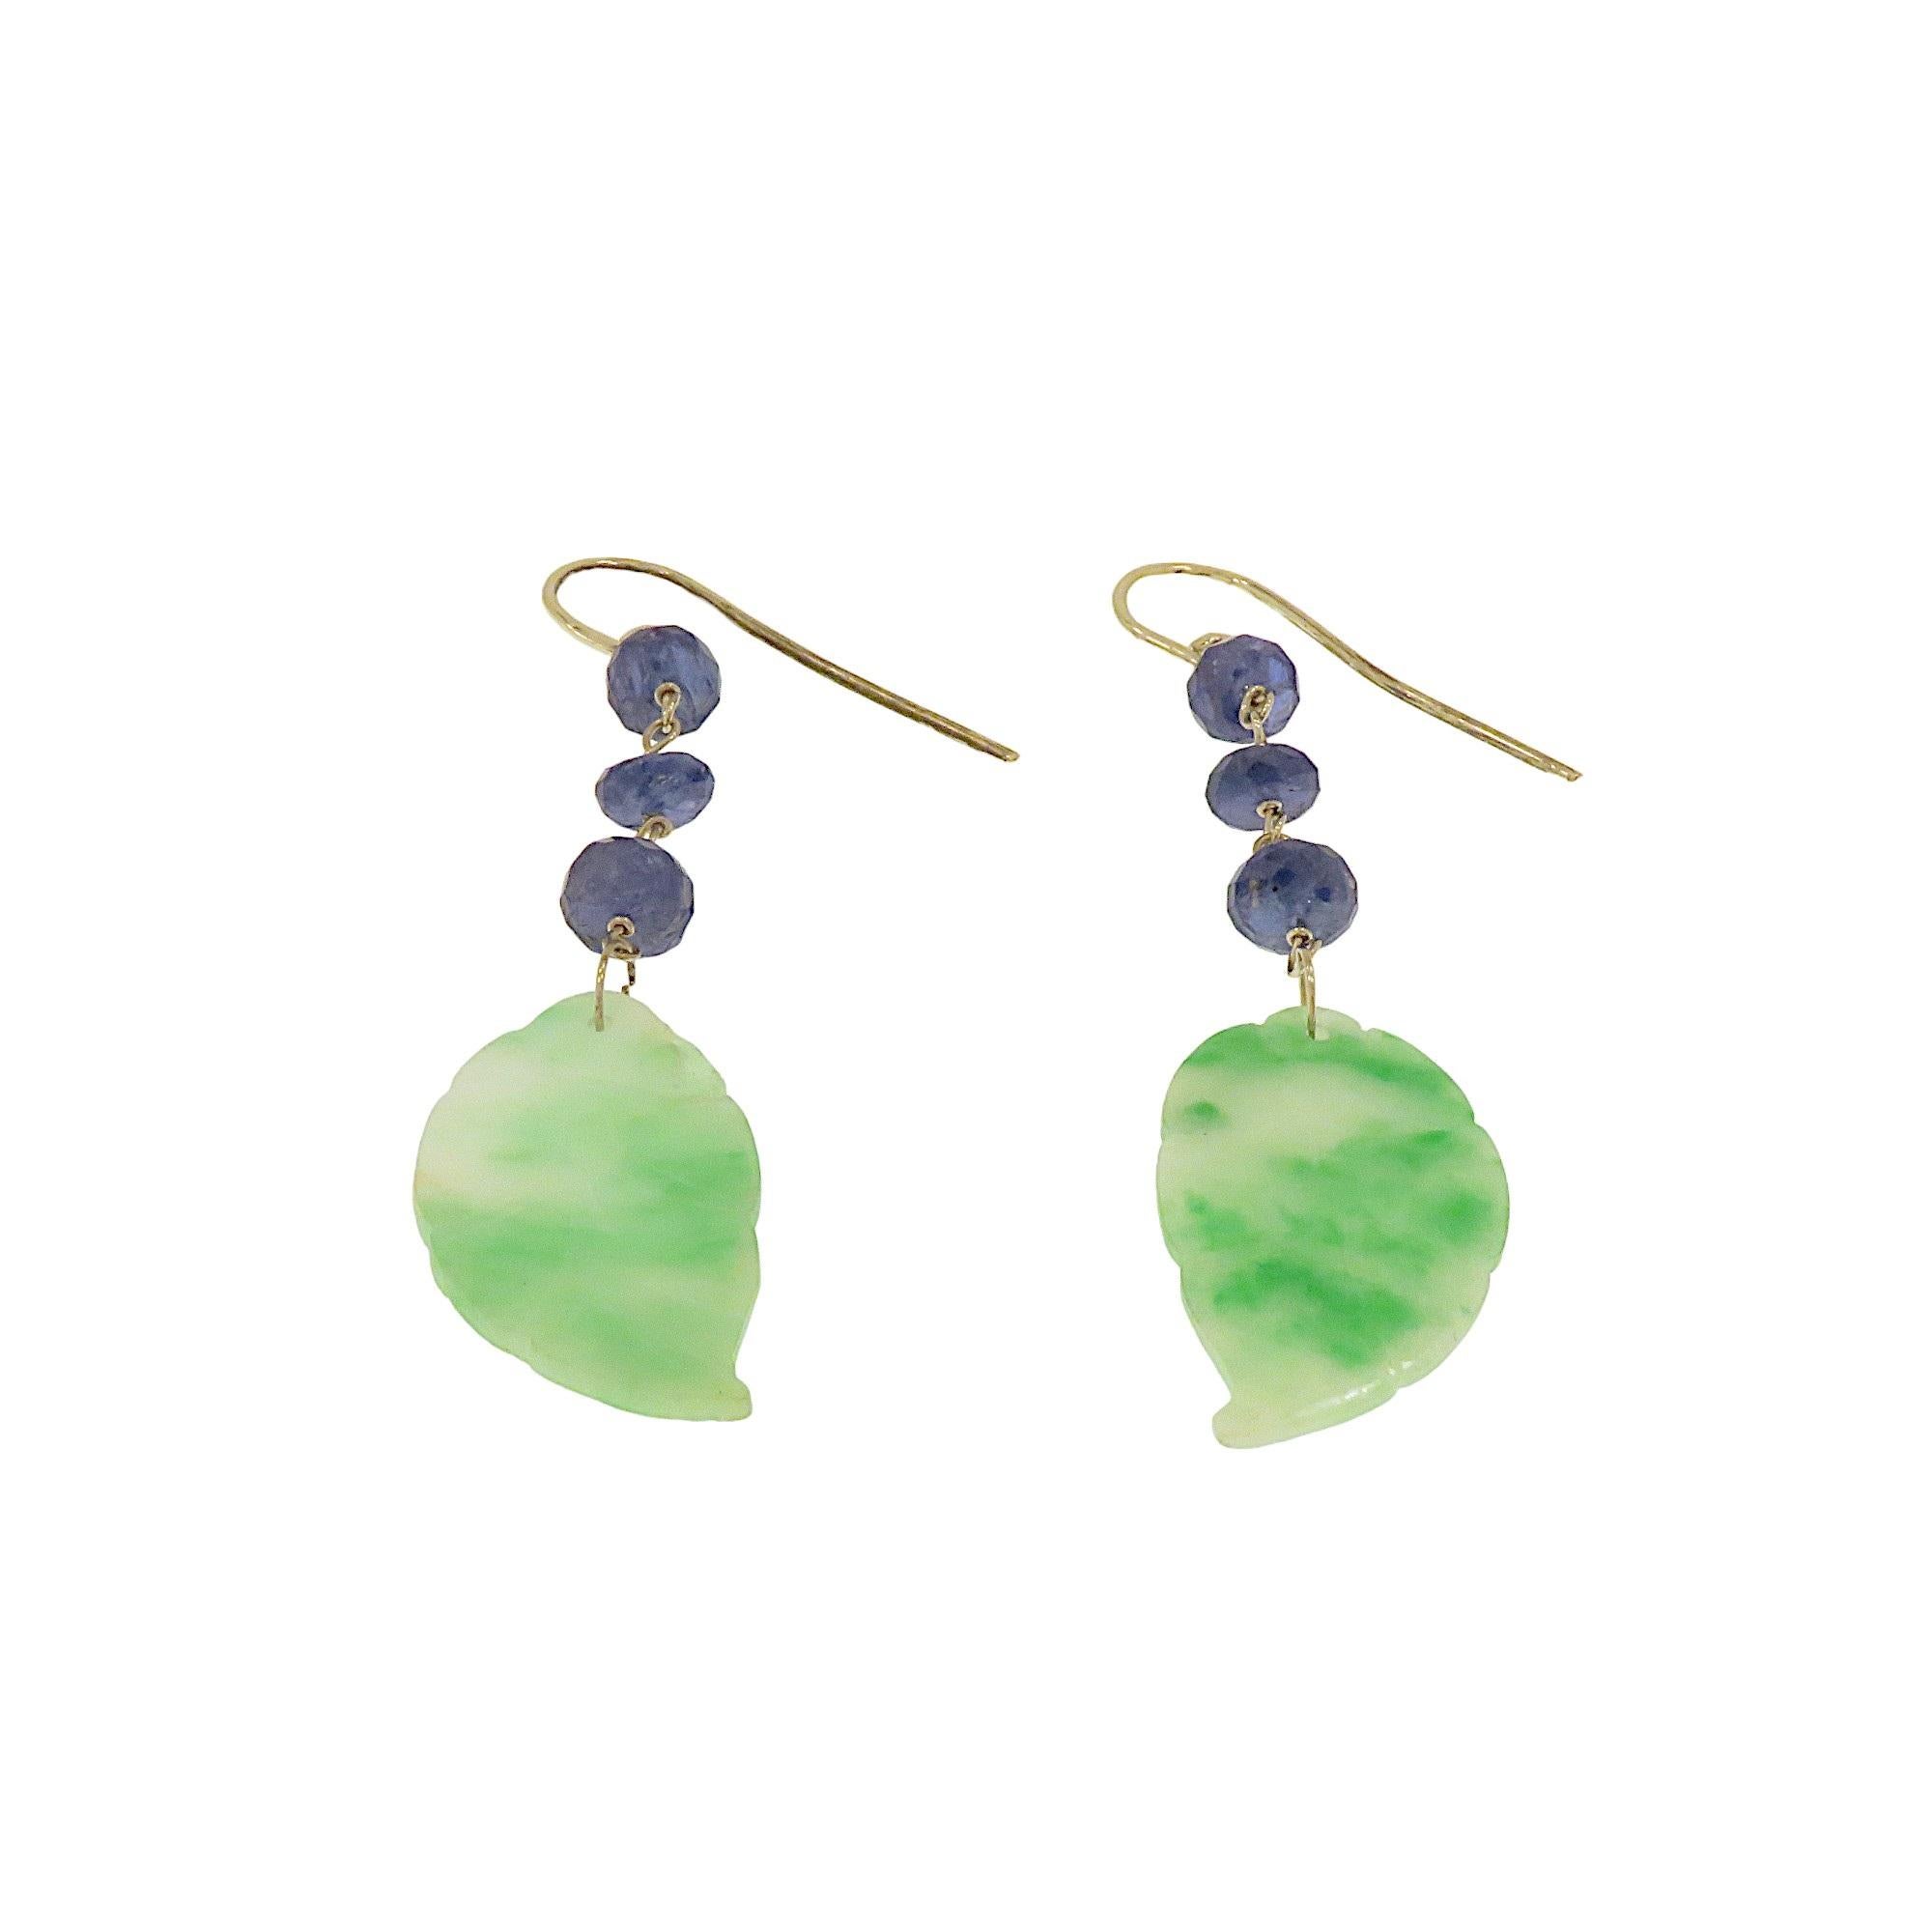 Contemporary Botta jewelry earrings with blue jade green sapphires in white gold For Sale